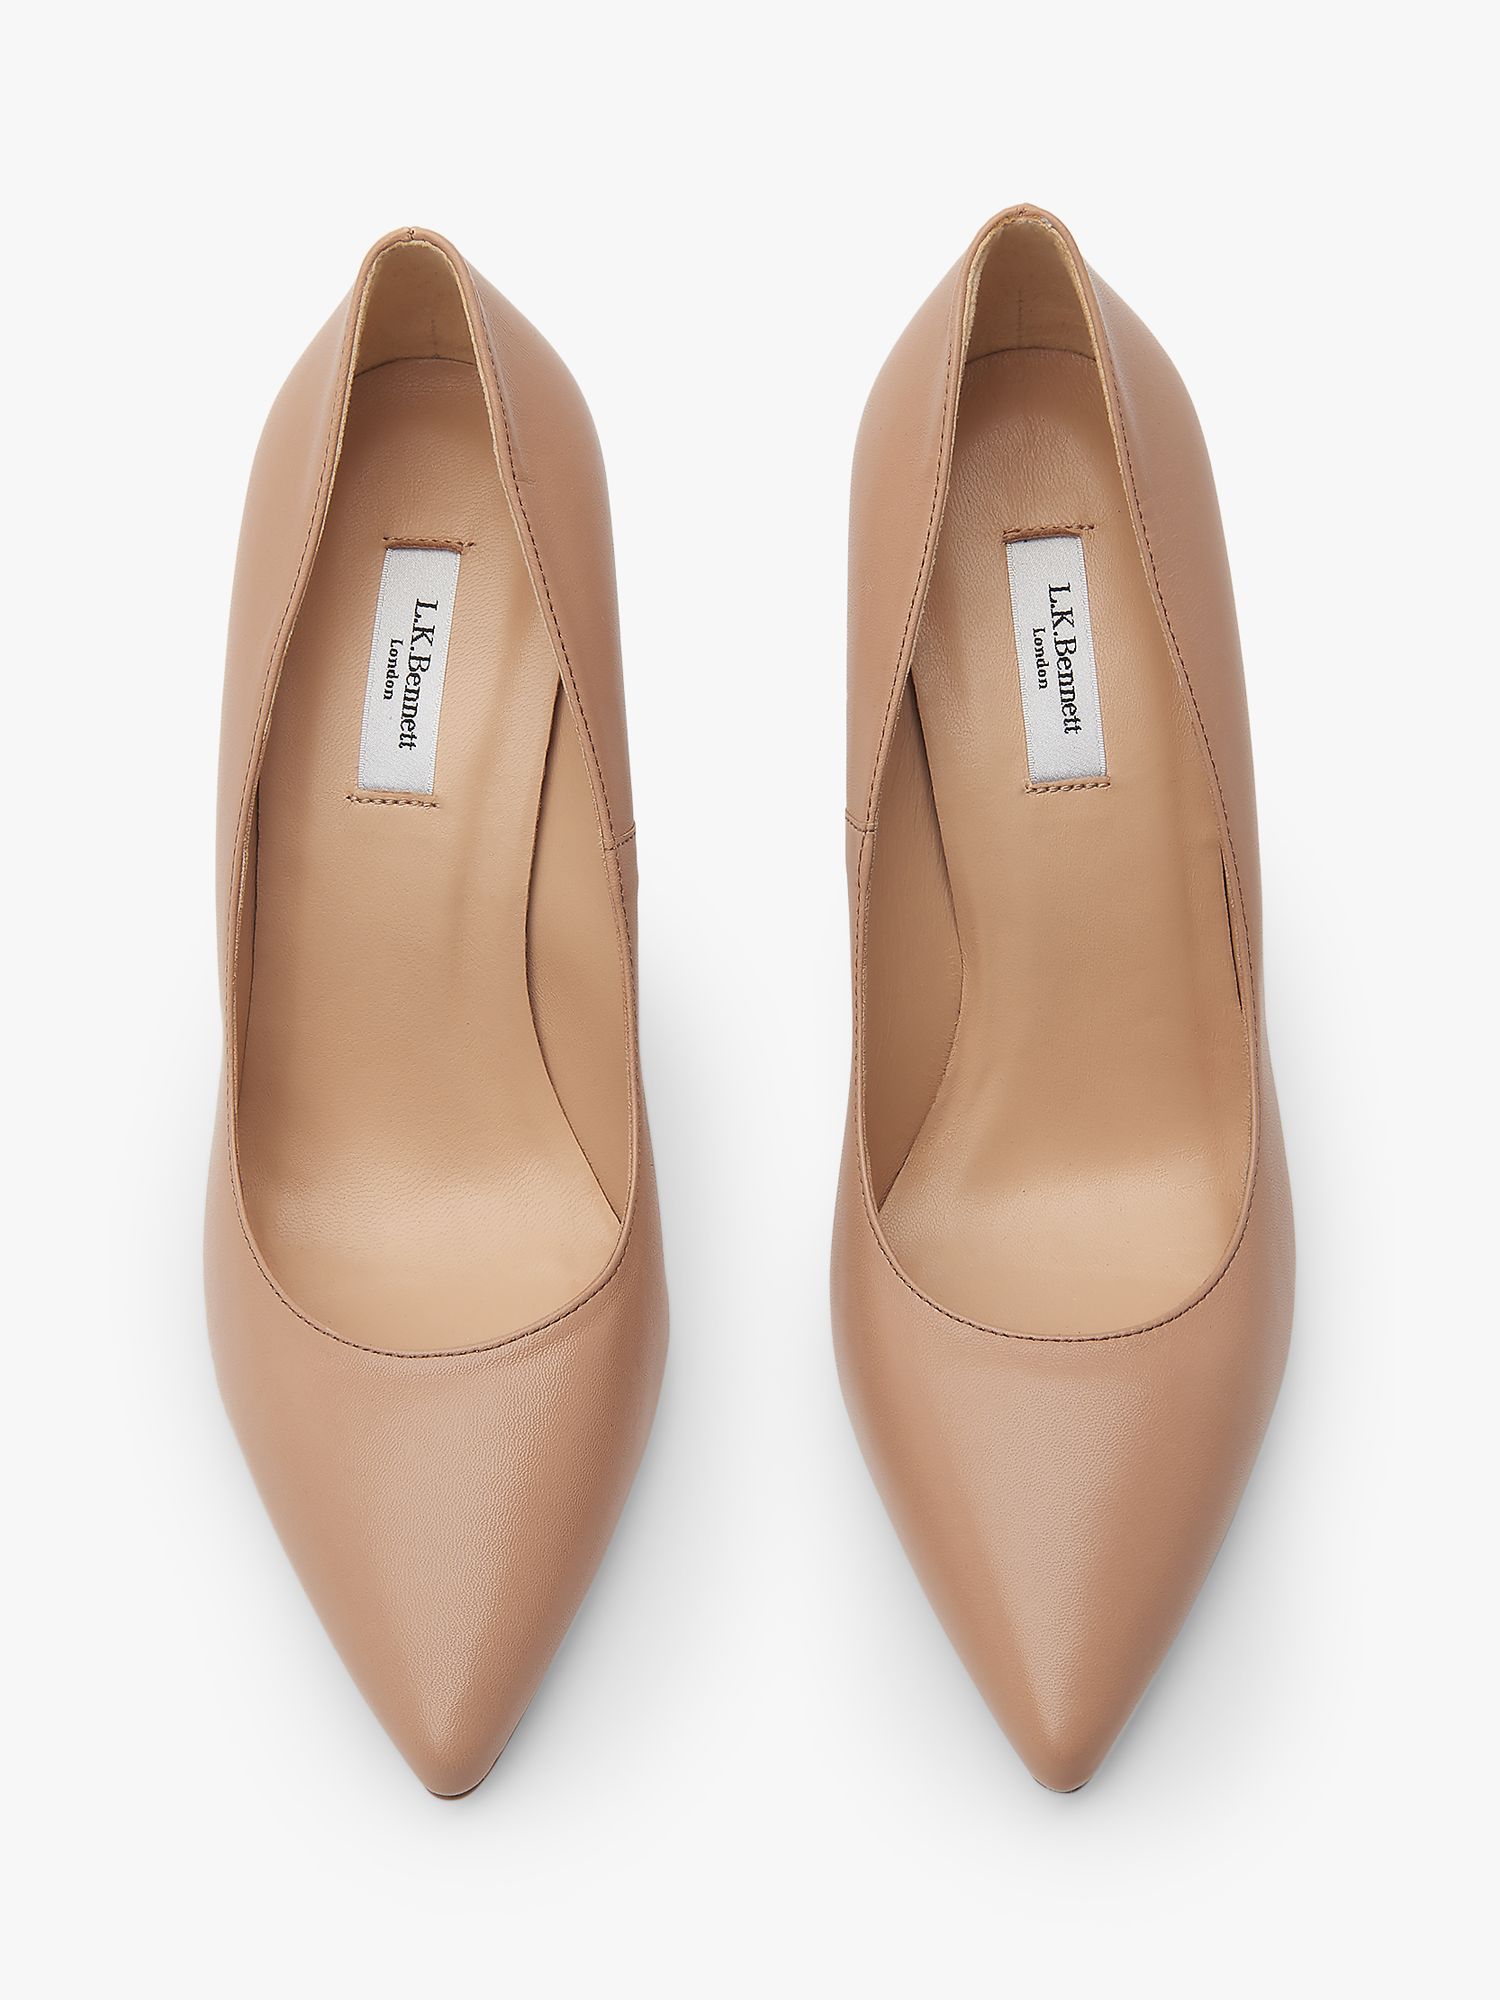 L.K.Bennett Fern Pointed Toe Leather Court Shoes, Beige at John Lewis ...